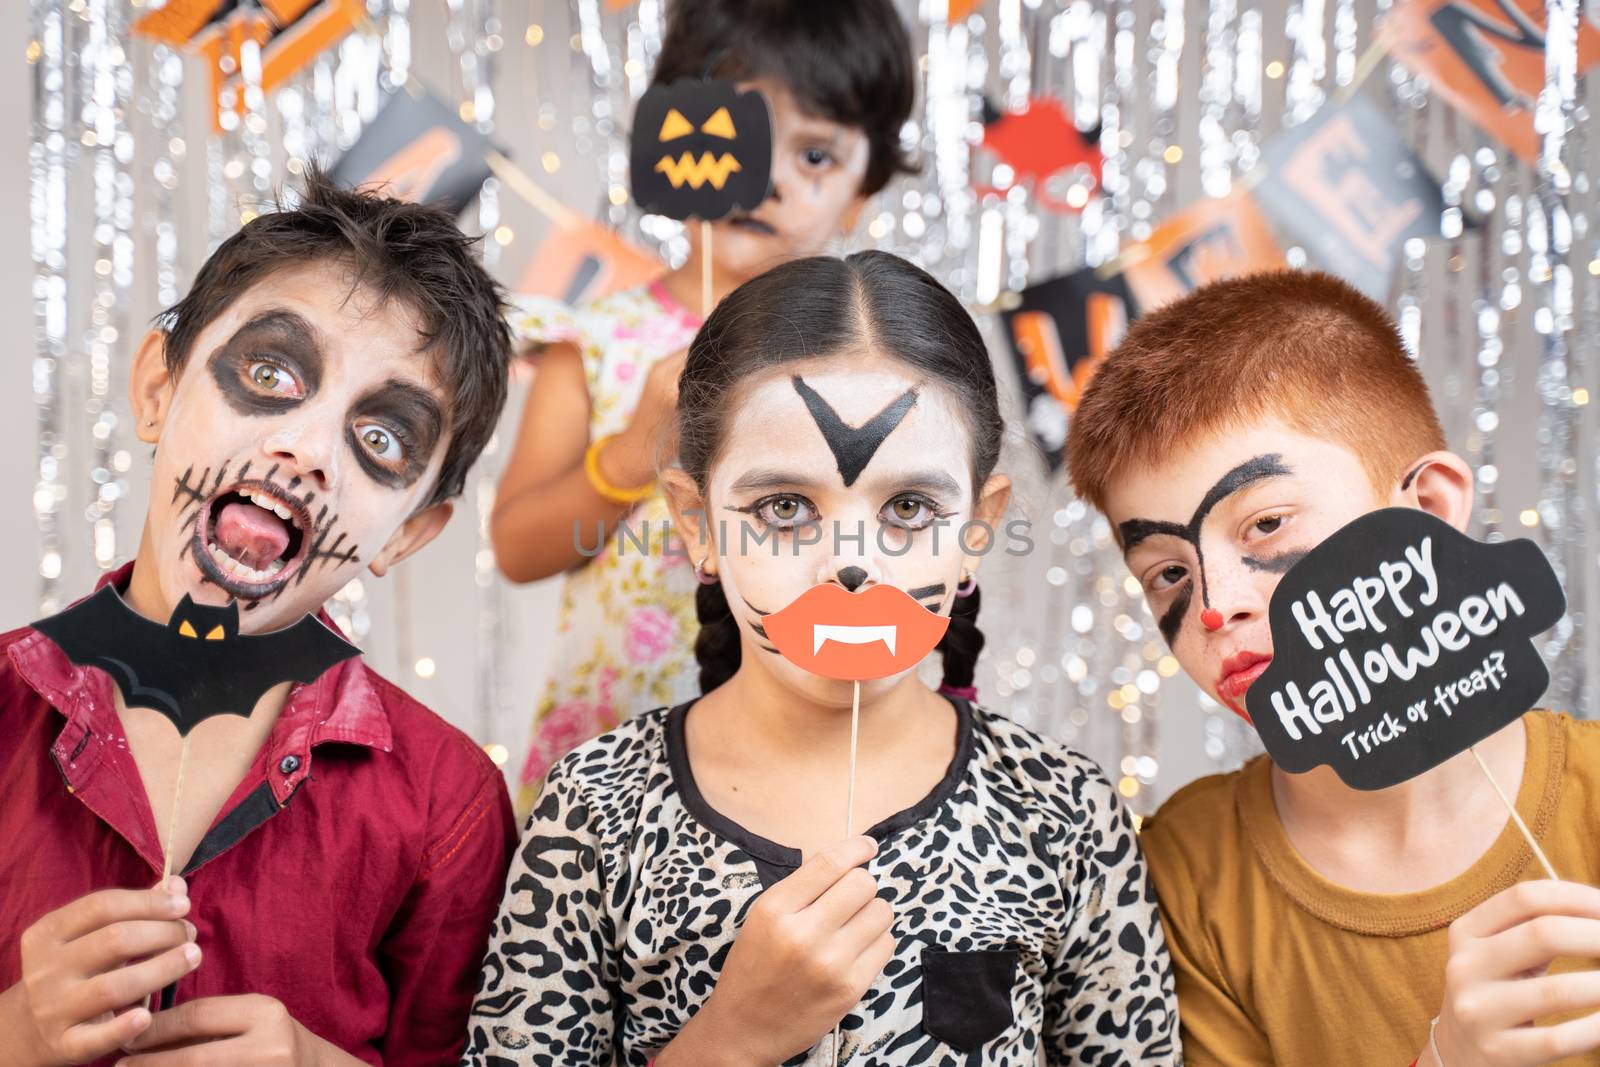 Group of kids in Halloween costumes making gesticulating scary or spooky faces by holding booth sprops on decorated background by looking into camera